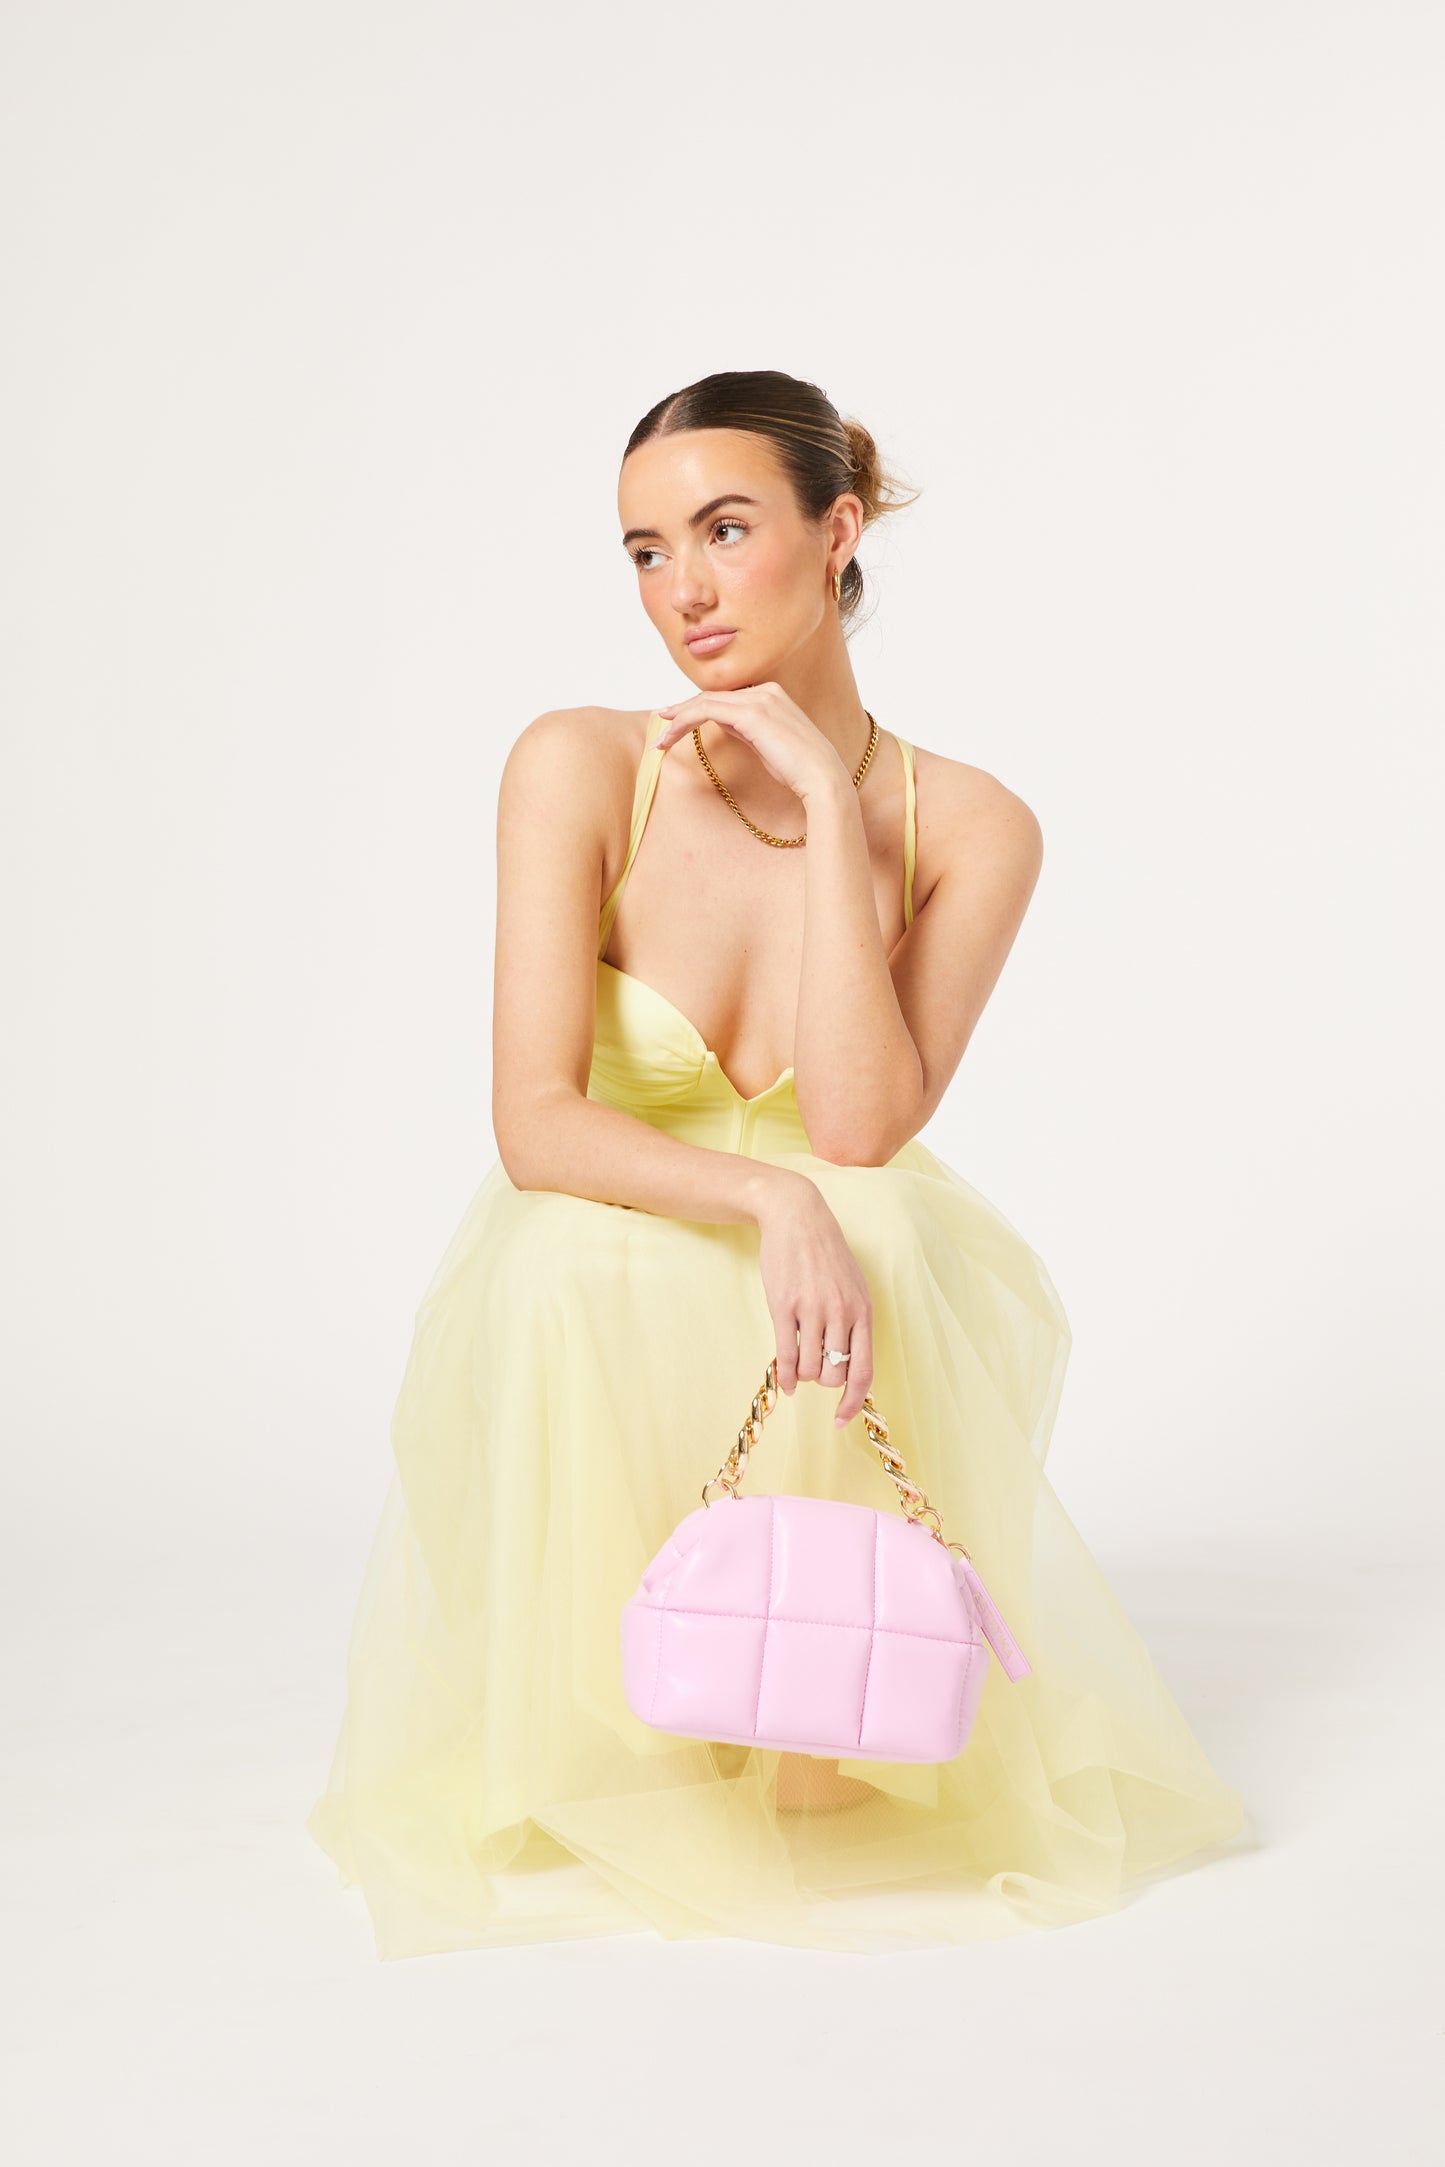 Model holding pink makeup clutch bag in a yellow dress